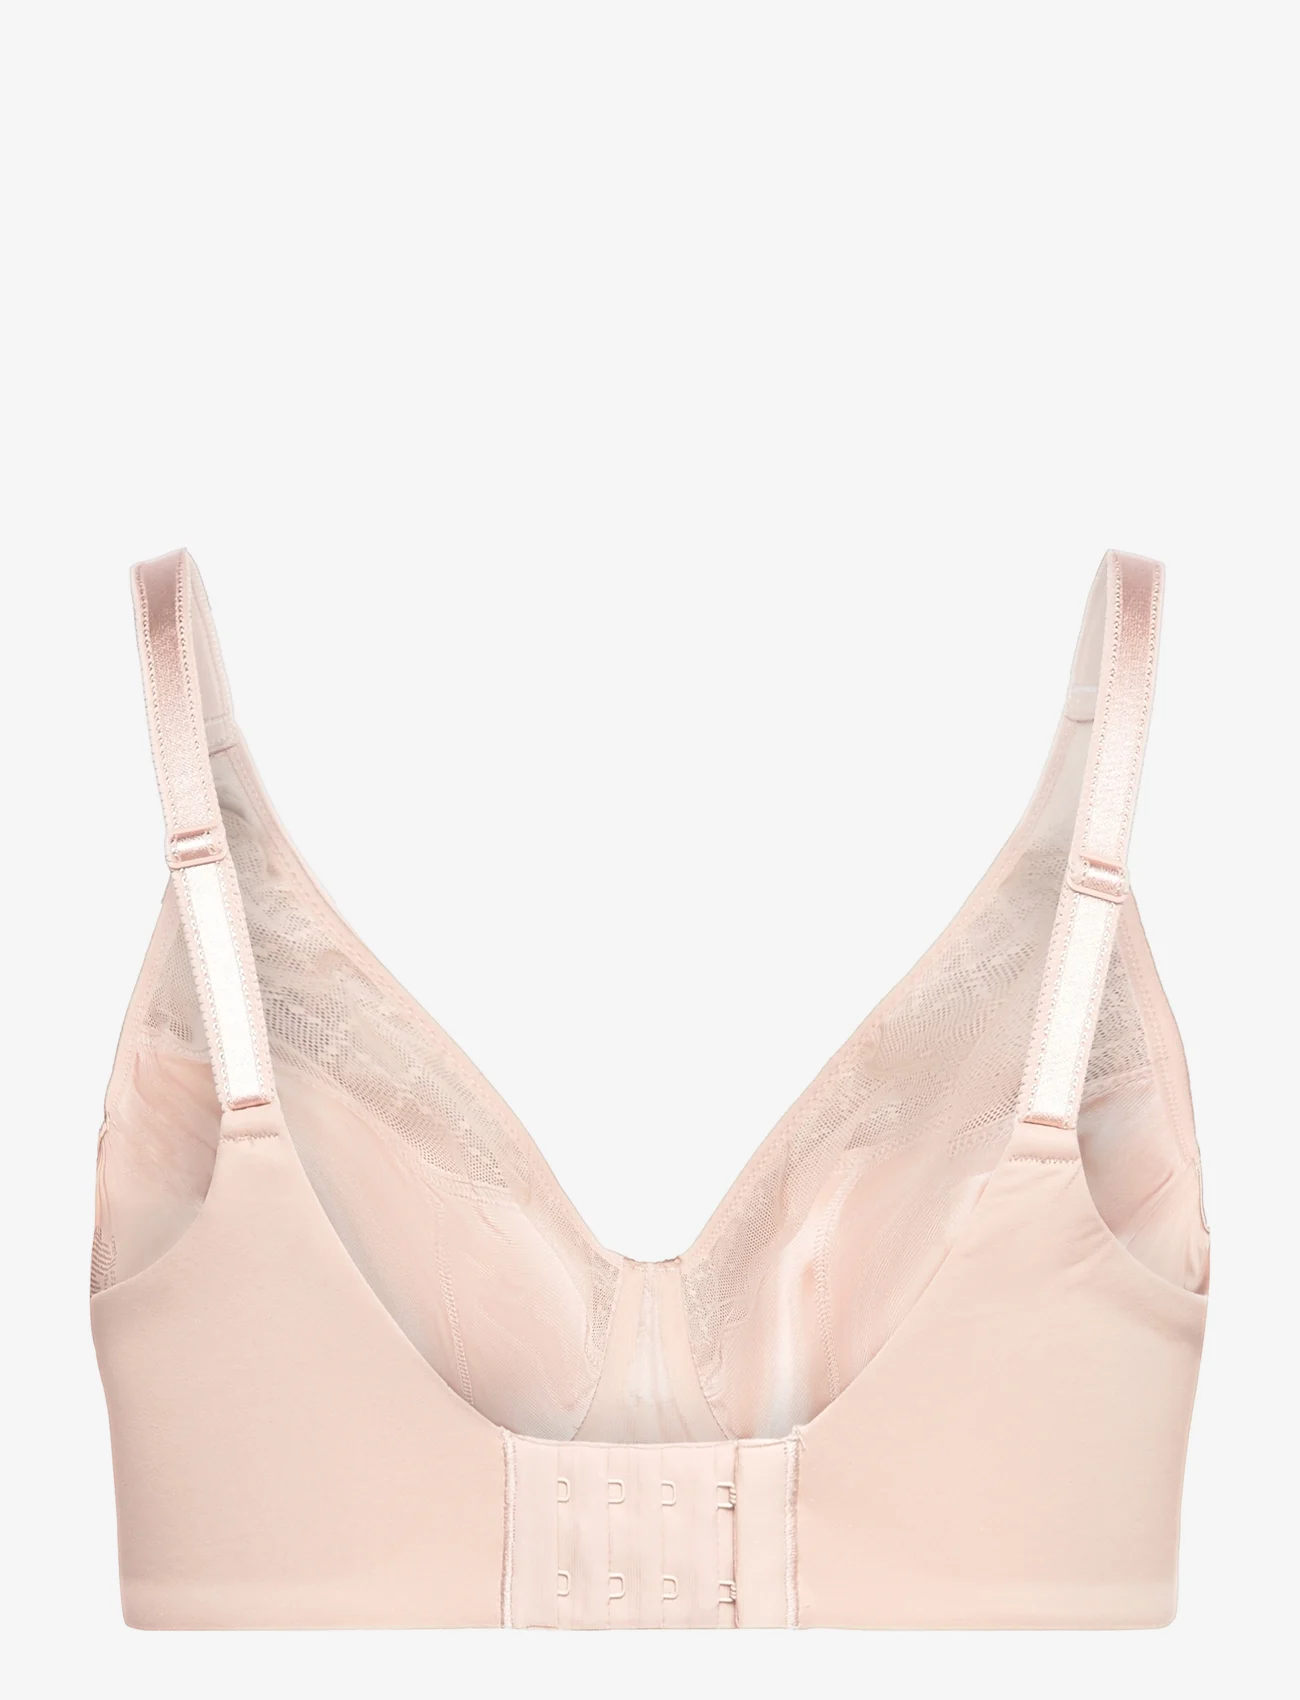 CHANTELLE - Norah Chic Covering Molded Bra - full cup bras - soft pink - 1